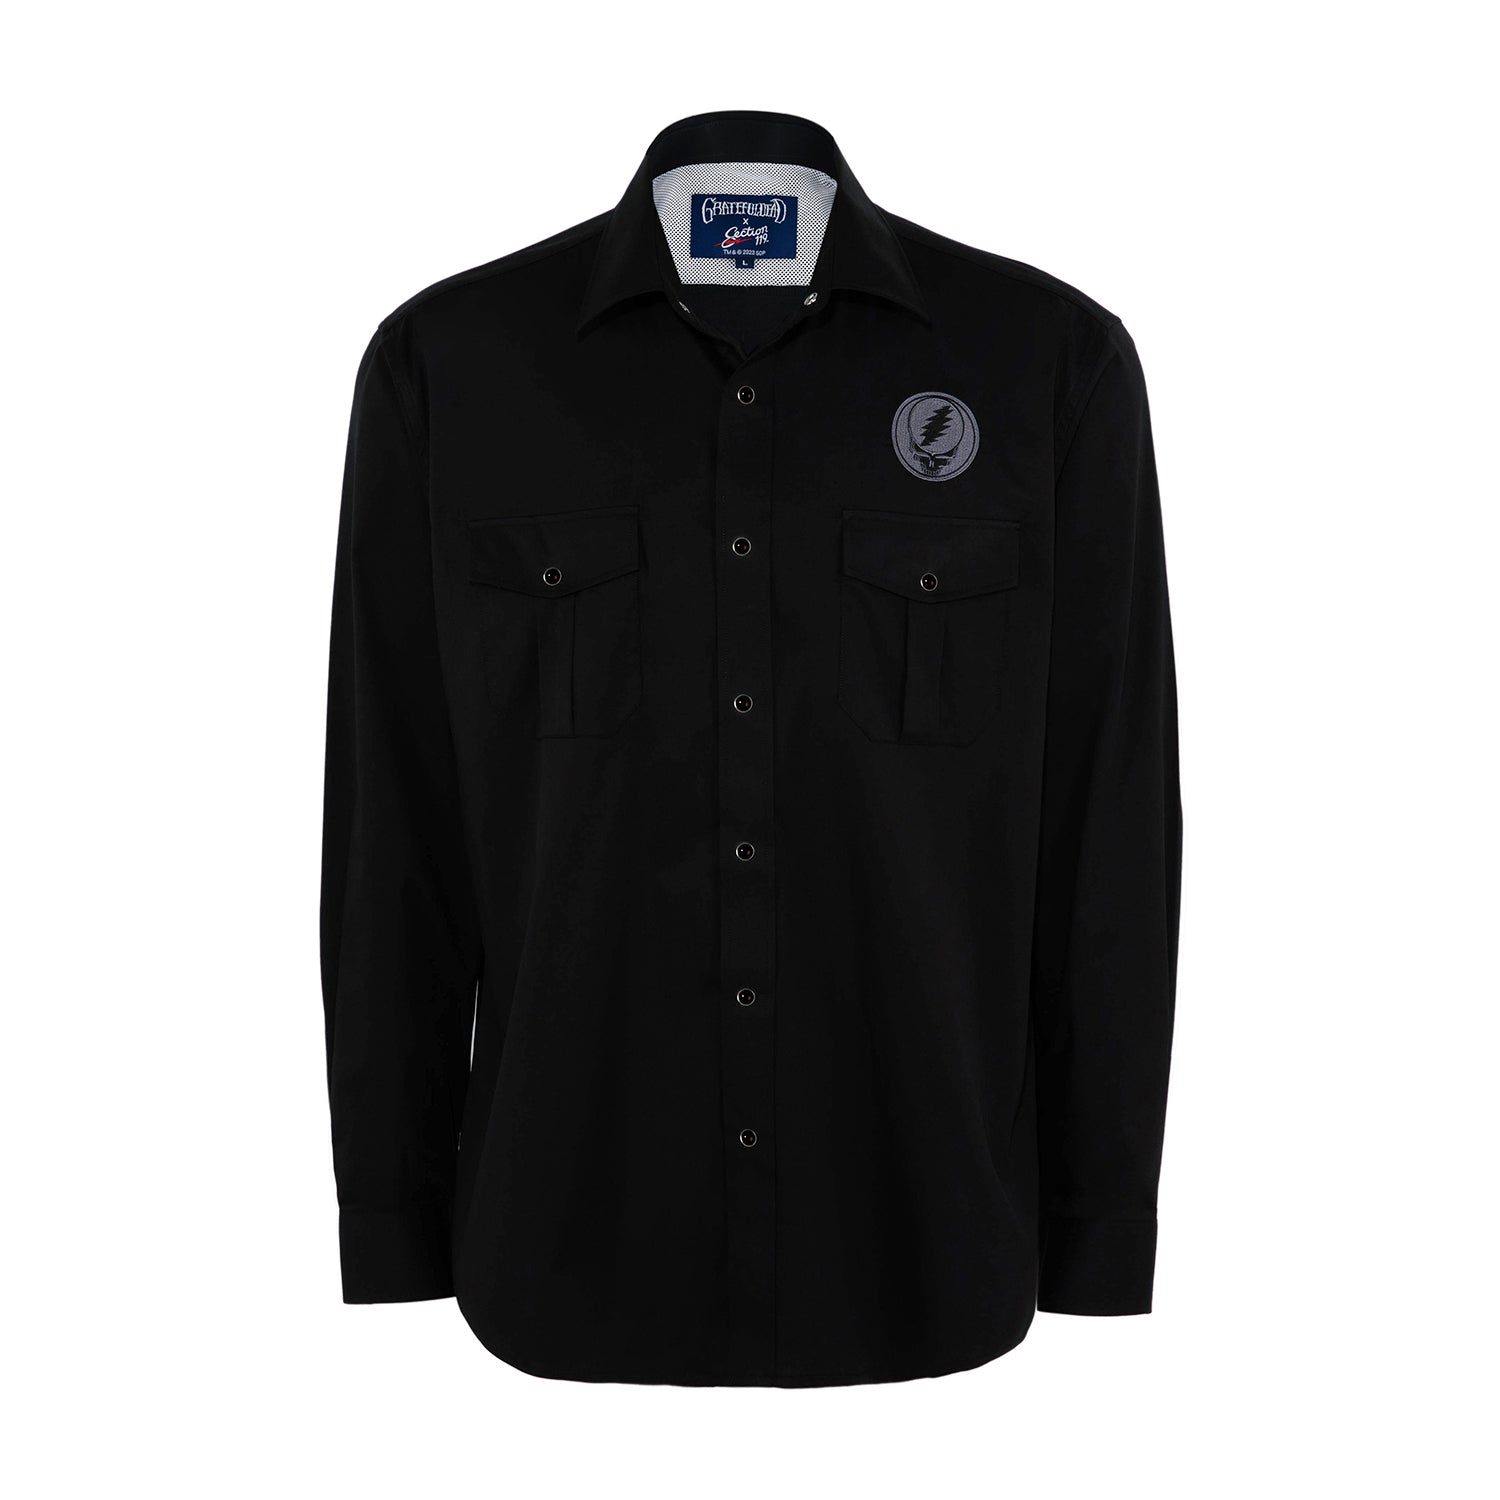 Grateful Dead Long Sleeve Button Down Snap Shirt Steal Your Face in Black M